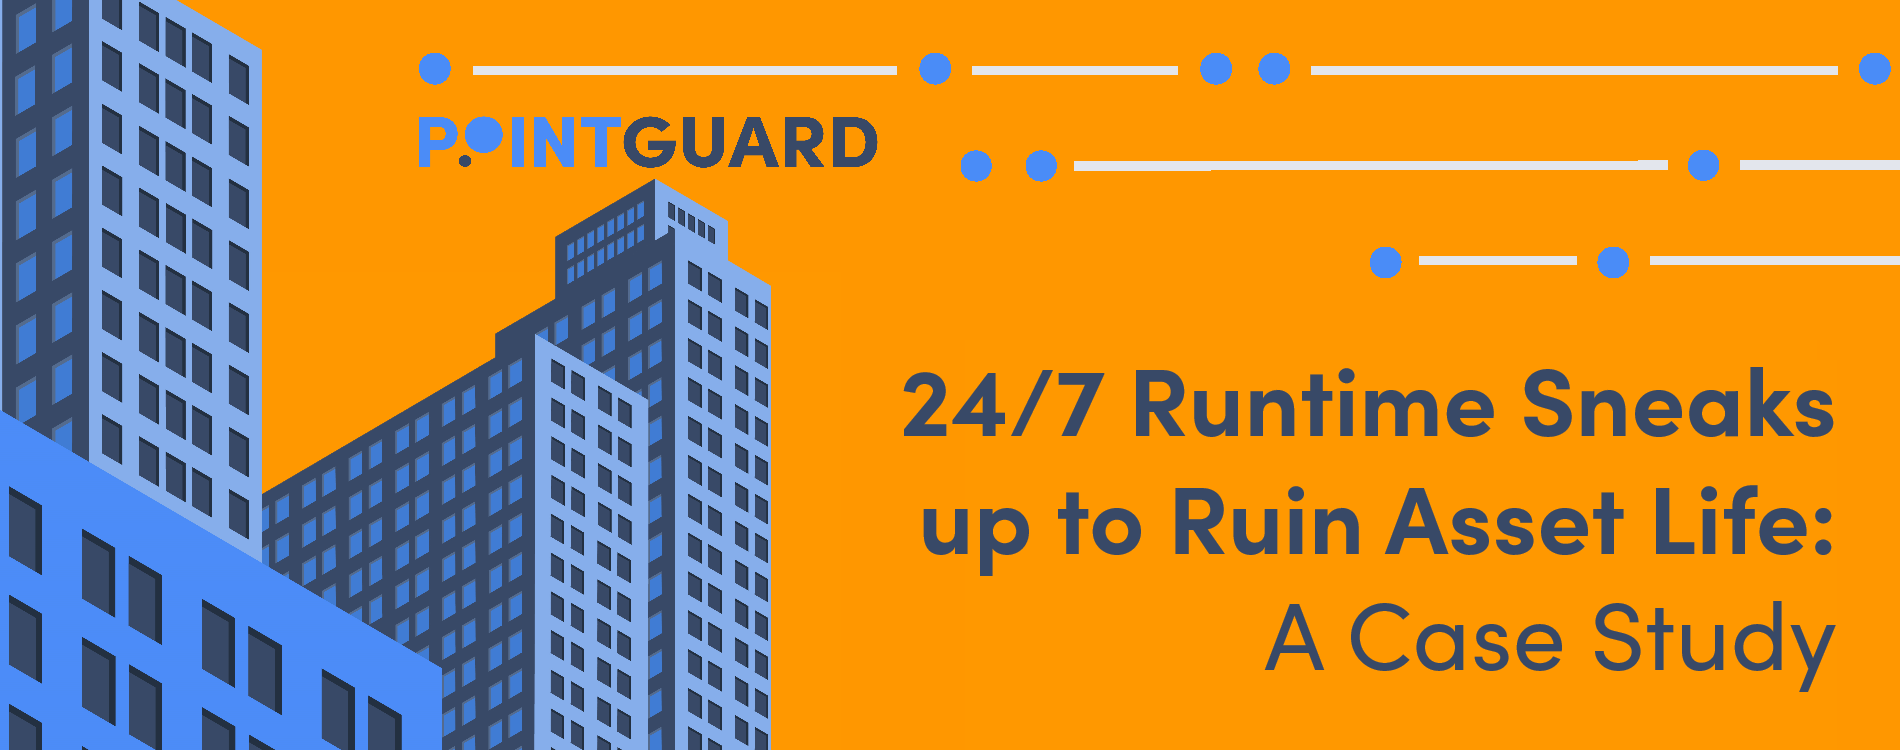 PointGuard Case Study - 24/7 Runtime Ruins Asset Life